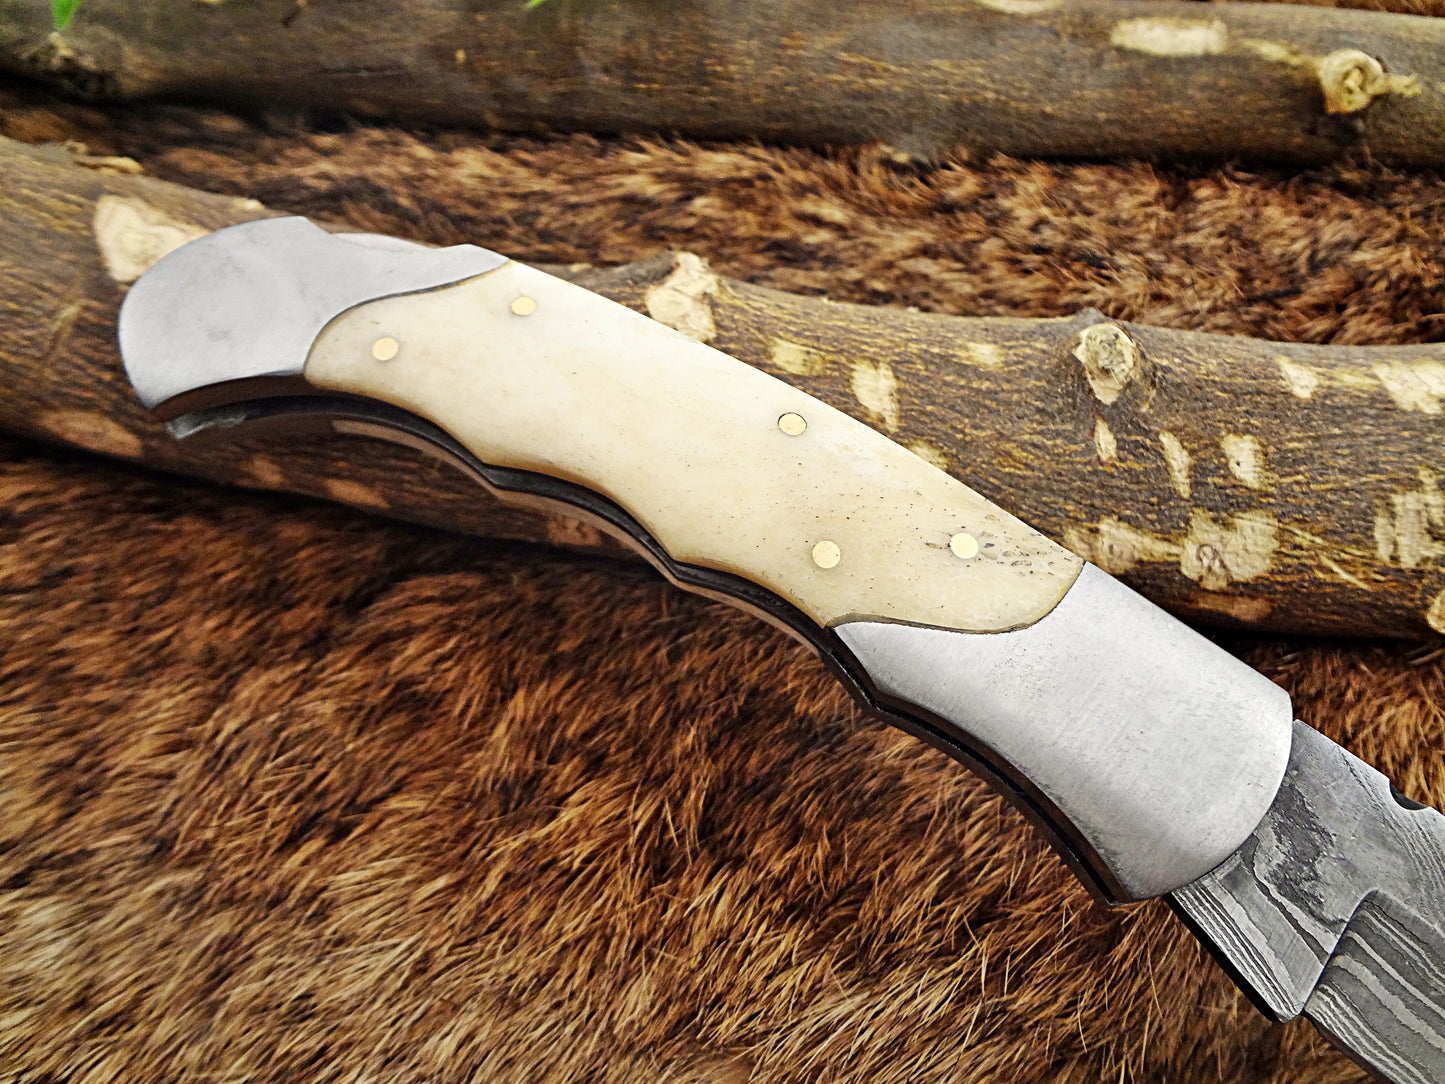 8" long Damascus steel Folding Knife, Walnut wood with Steel bolster scale, custom made 3.5" Hand Forged blade cow hide leather sheath